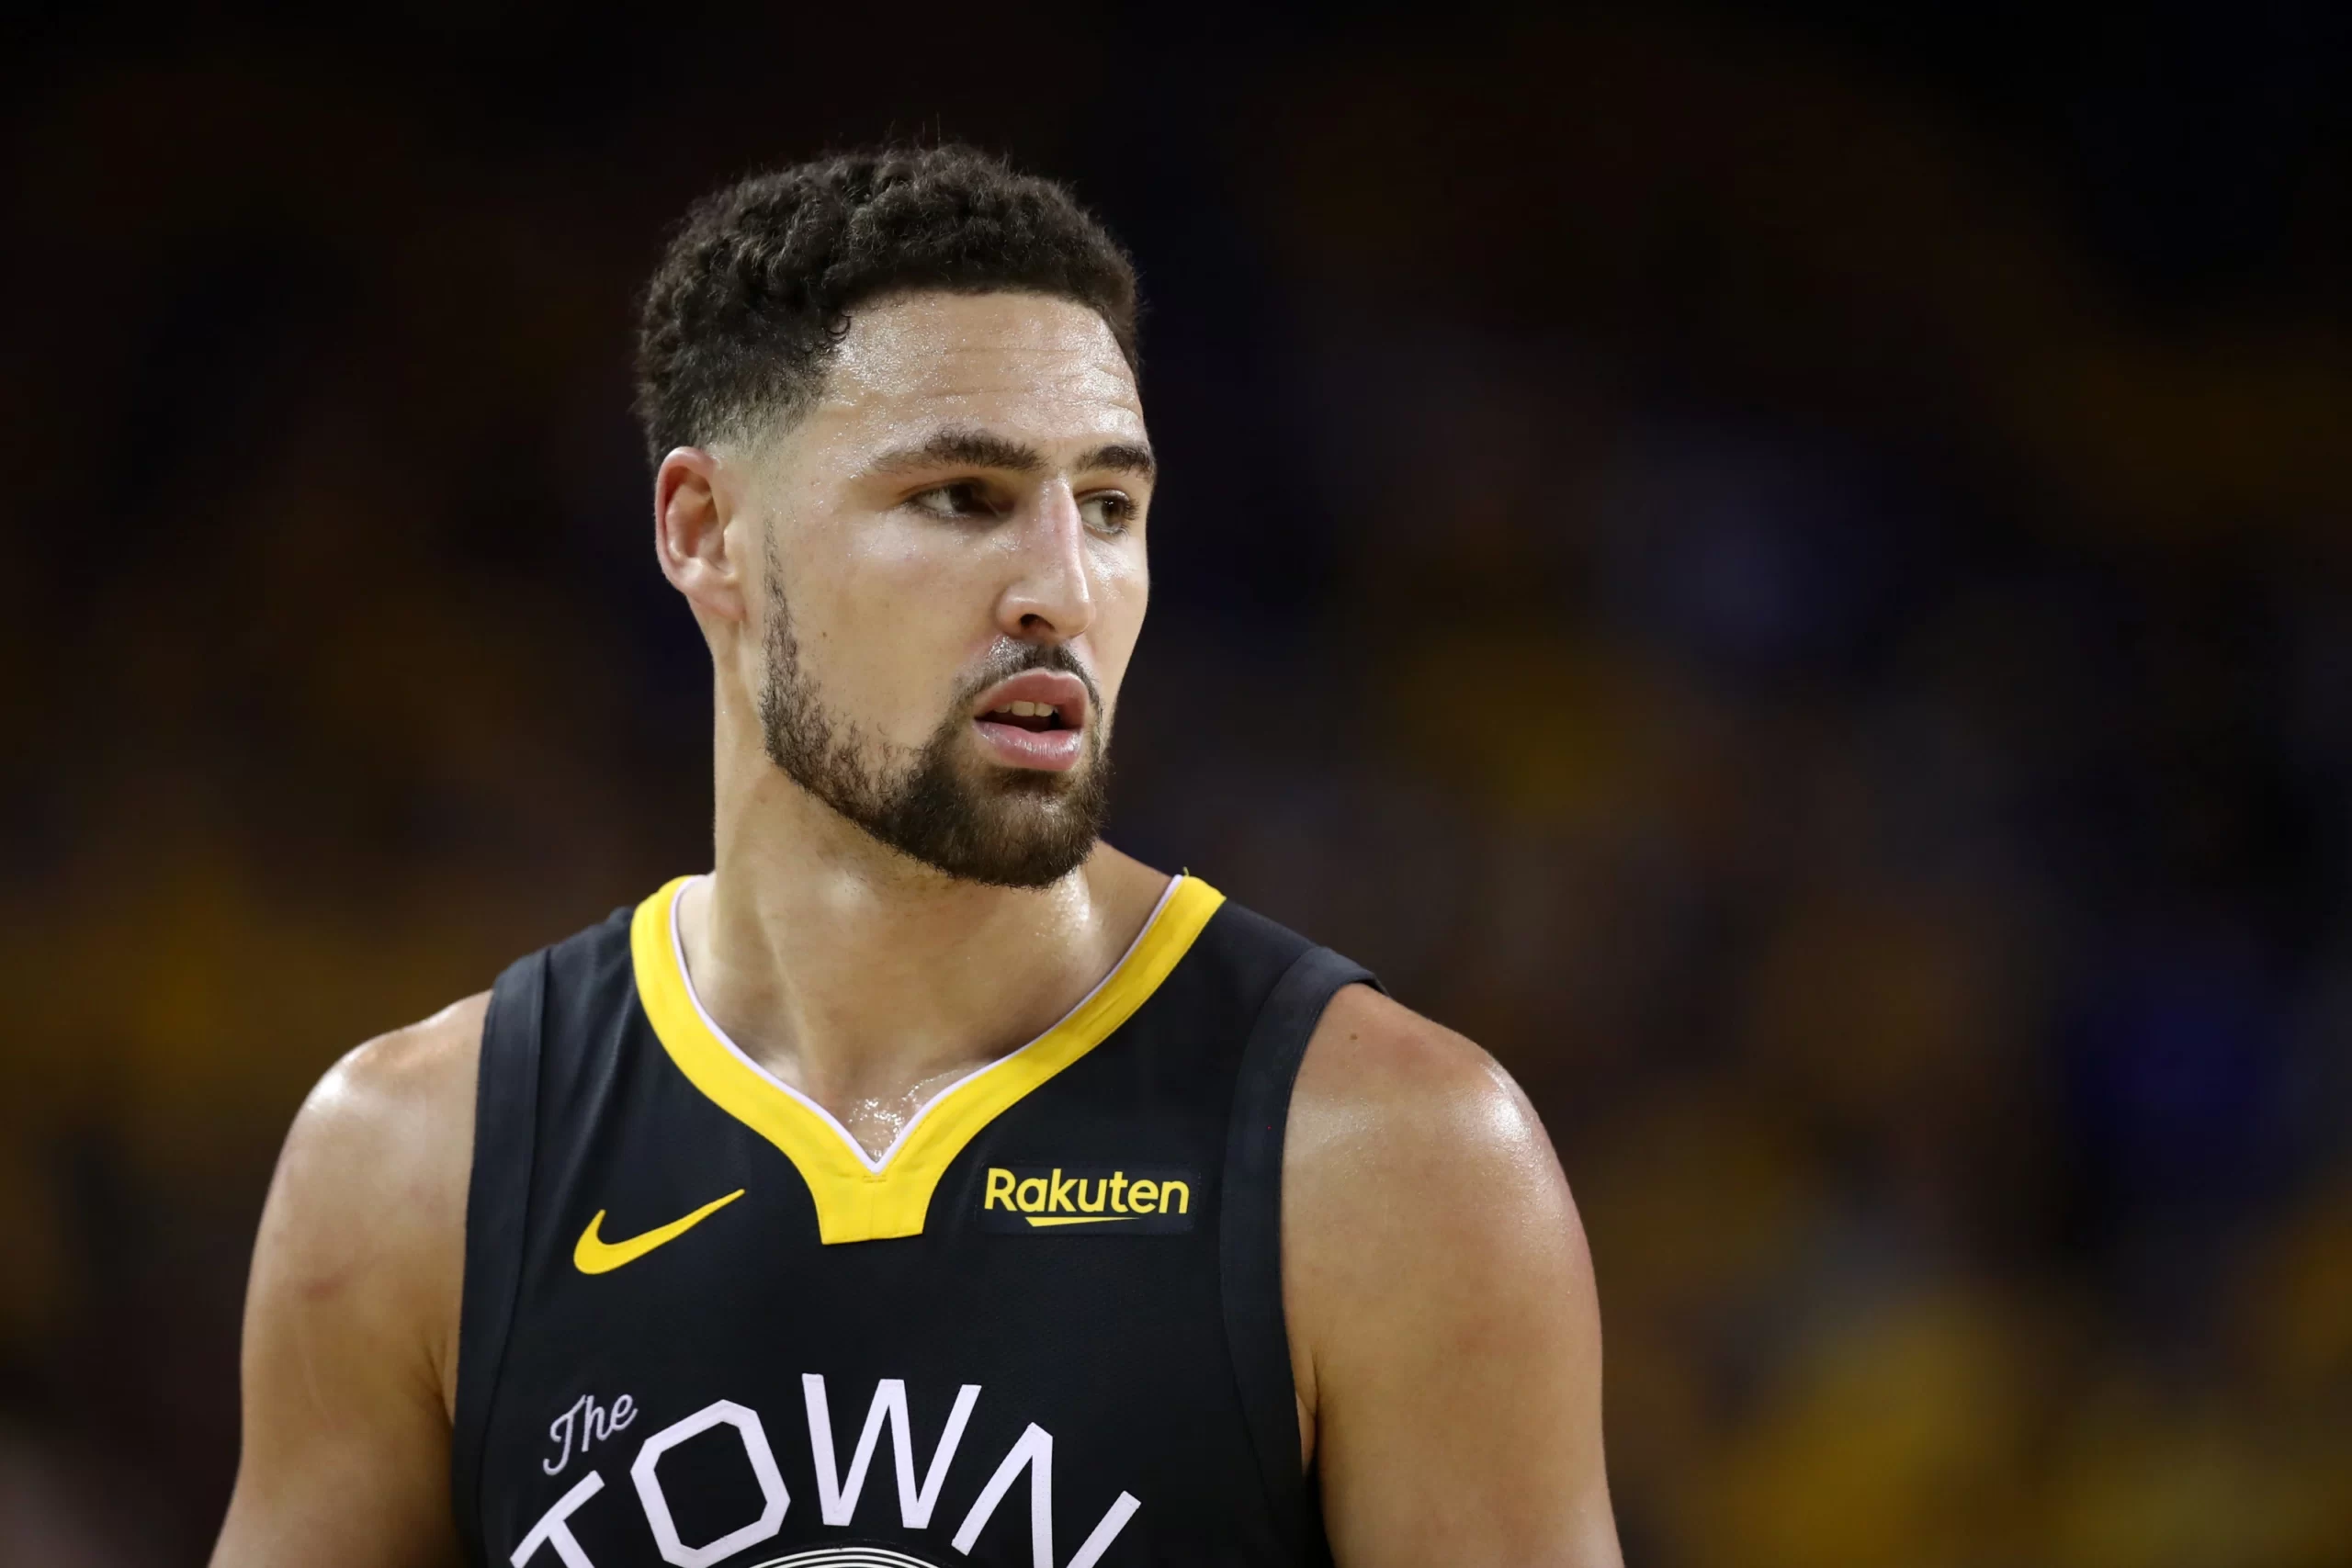 Arenas discusses the way forward in Klay Thompson's future after his reported $48 million contract rejection